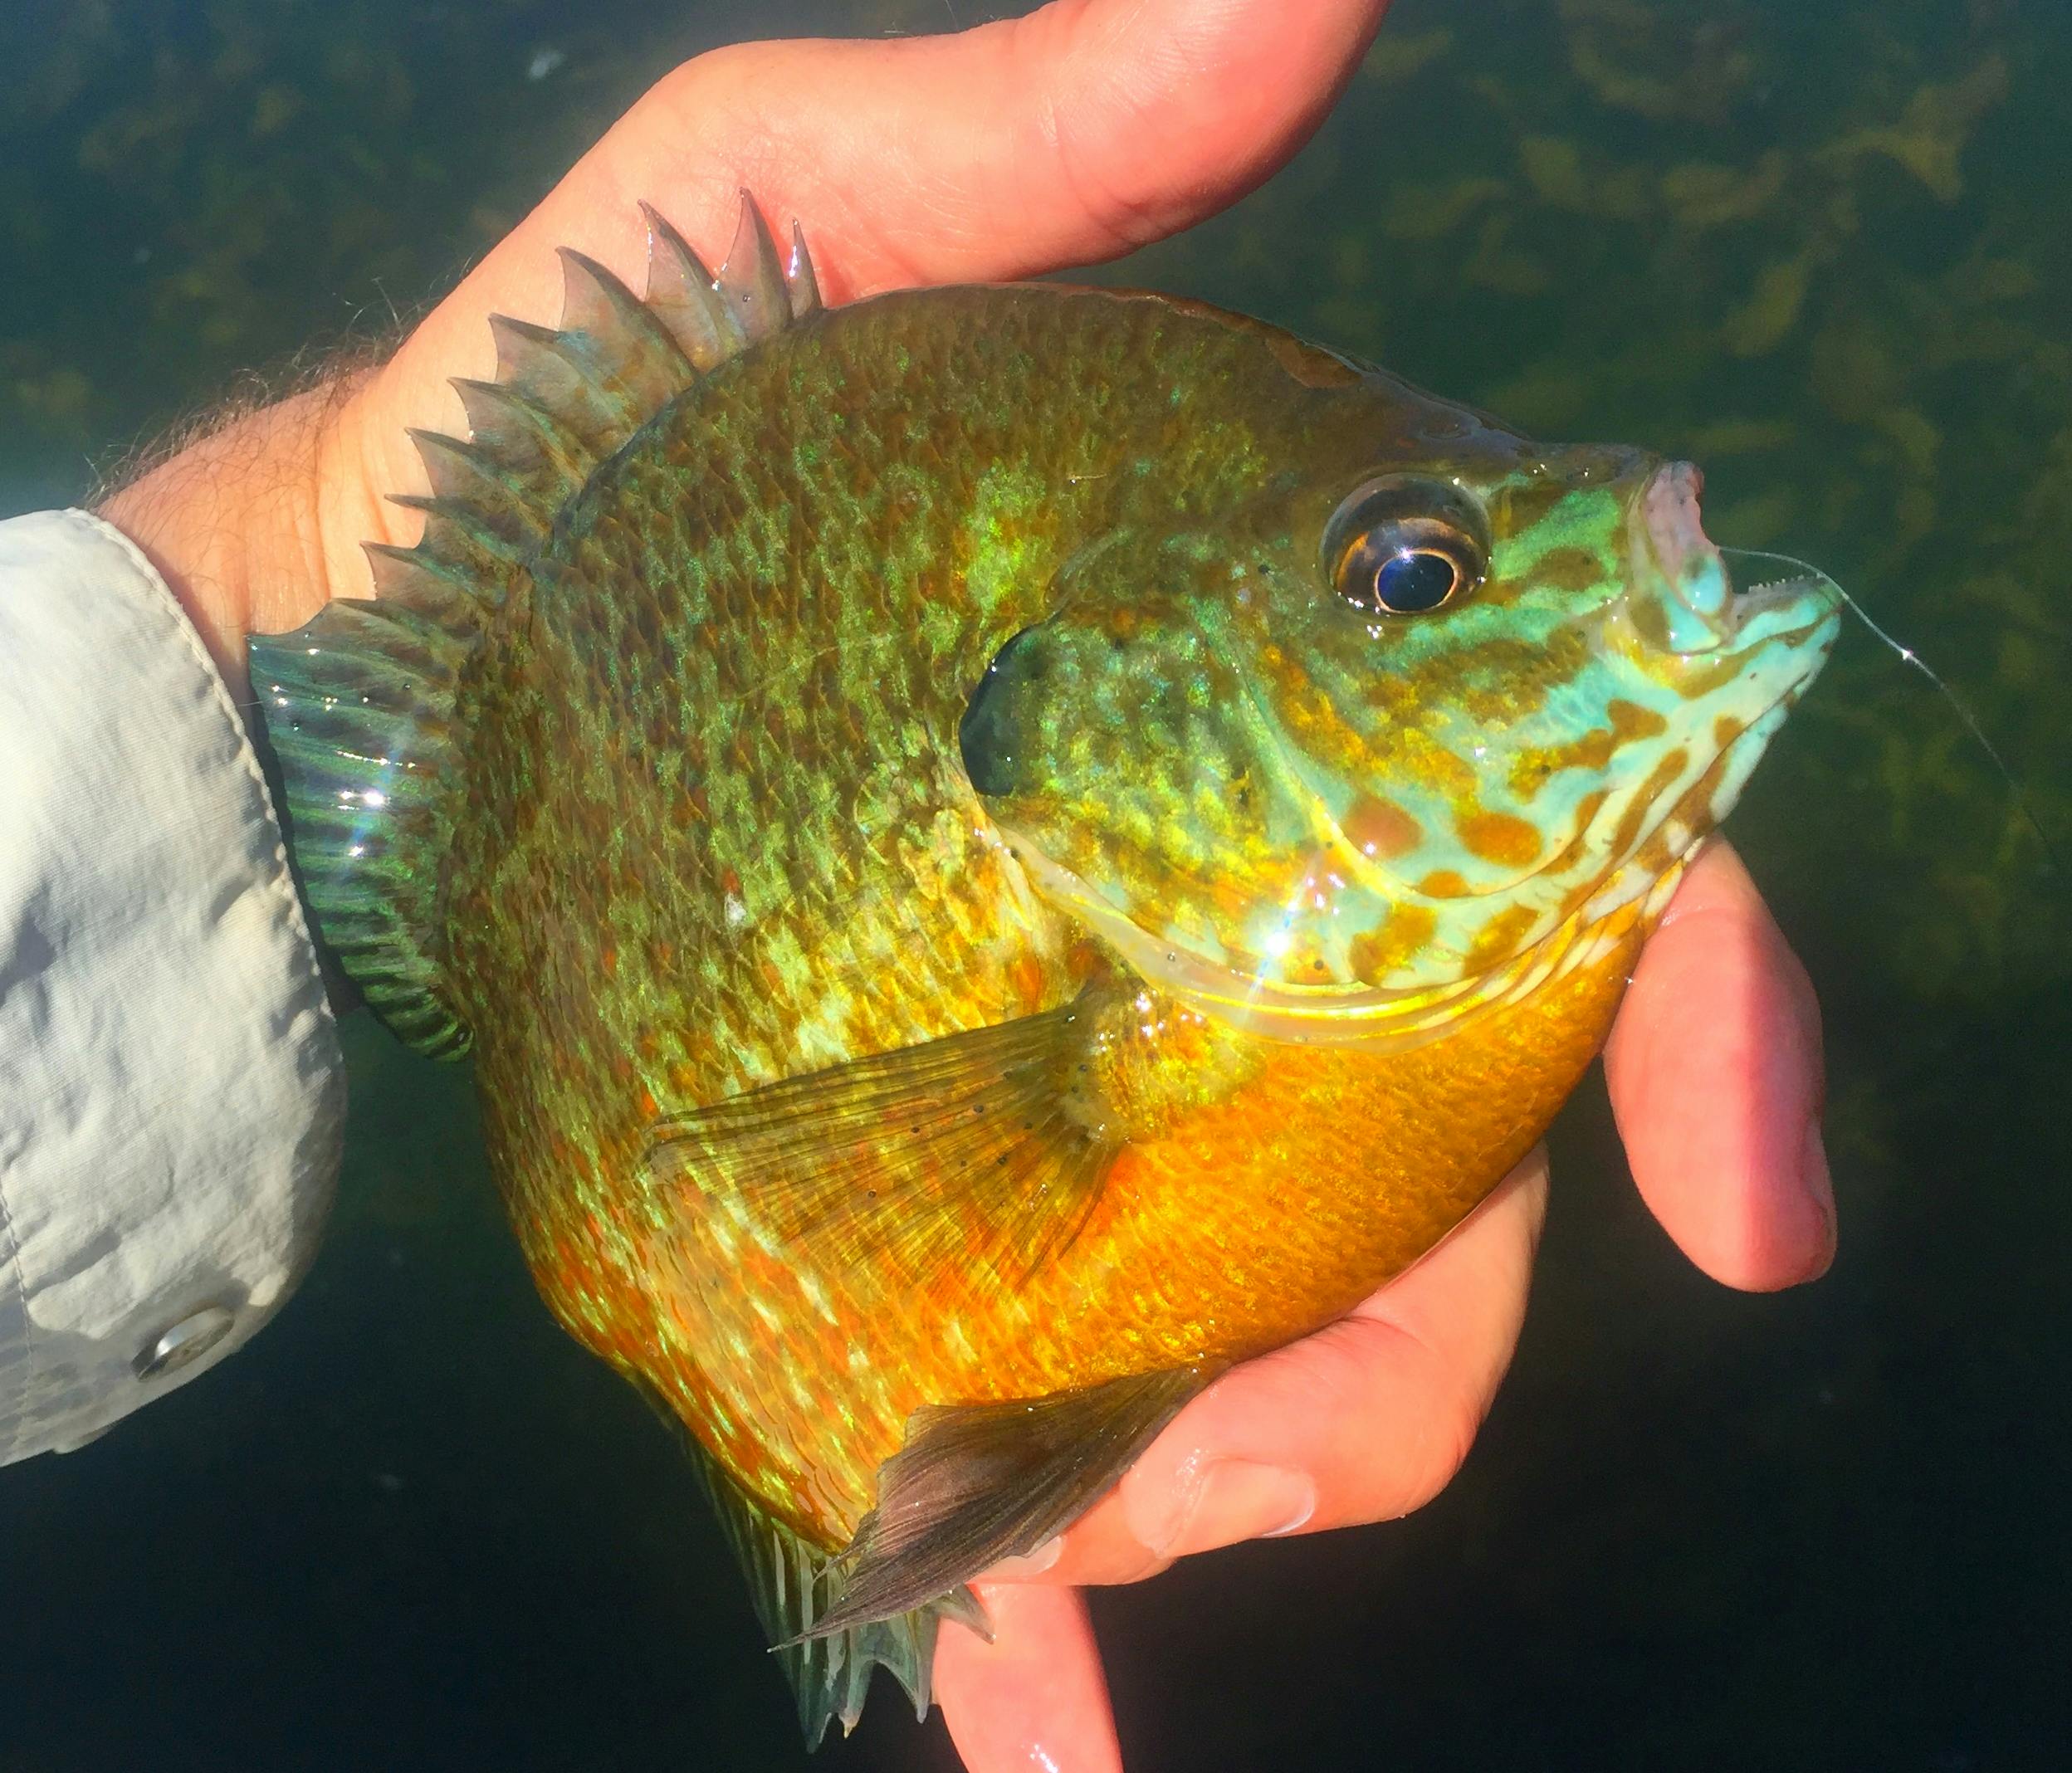 First time going for panfish, pretty sure it's a bluegill. My